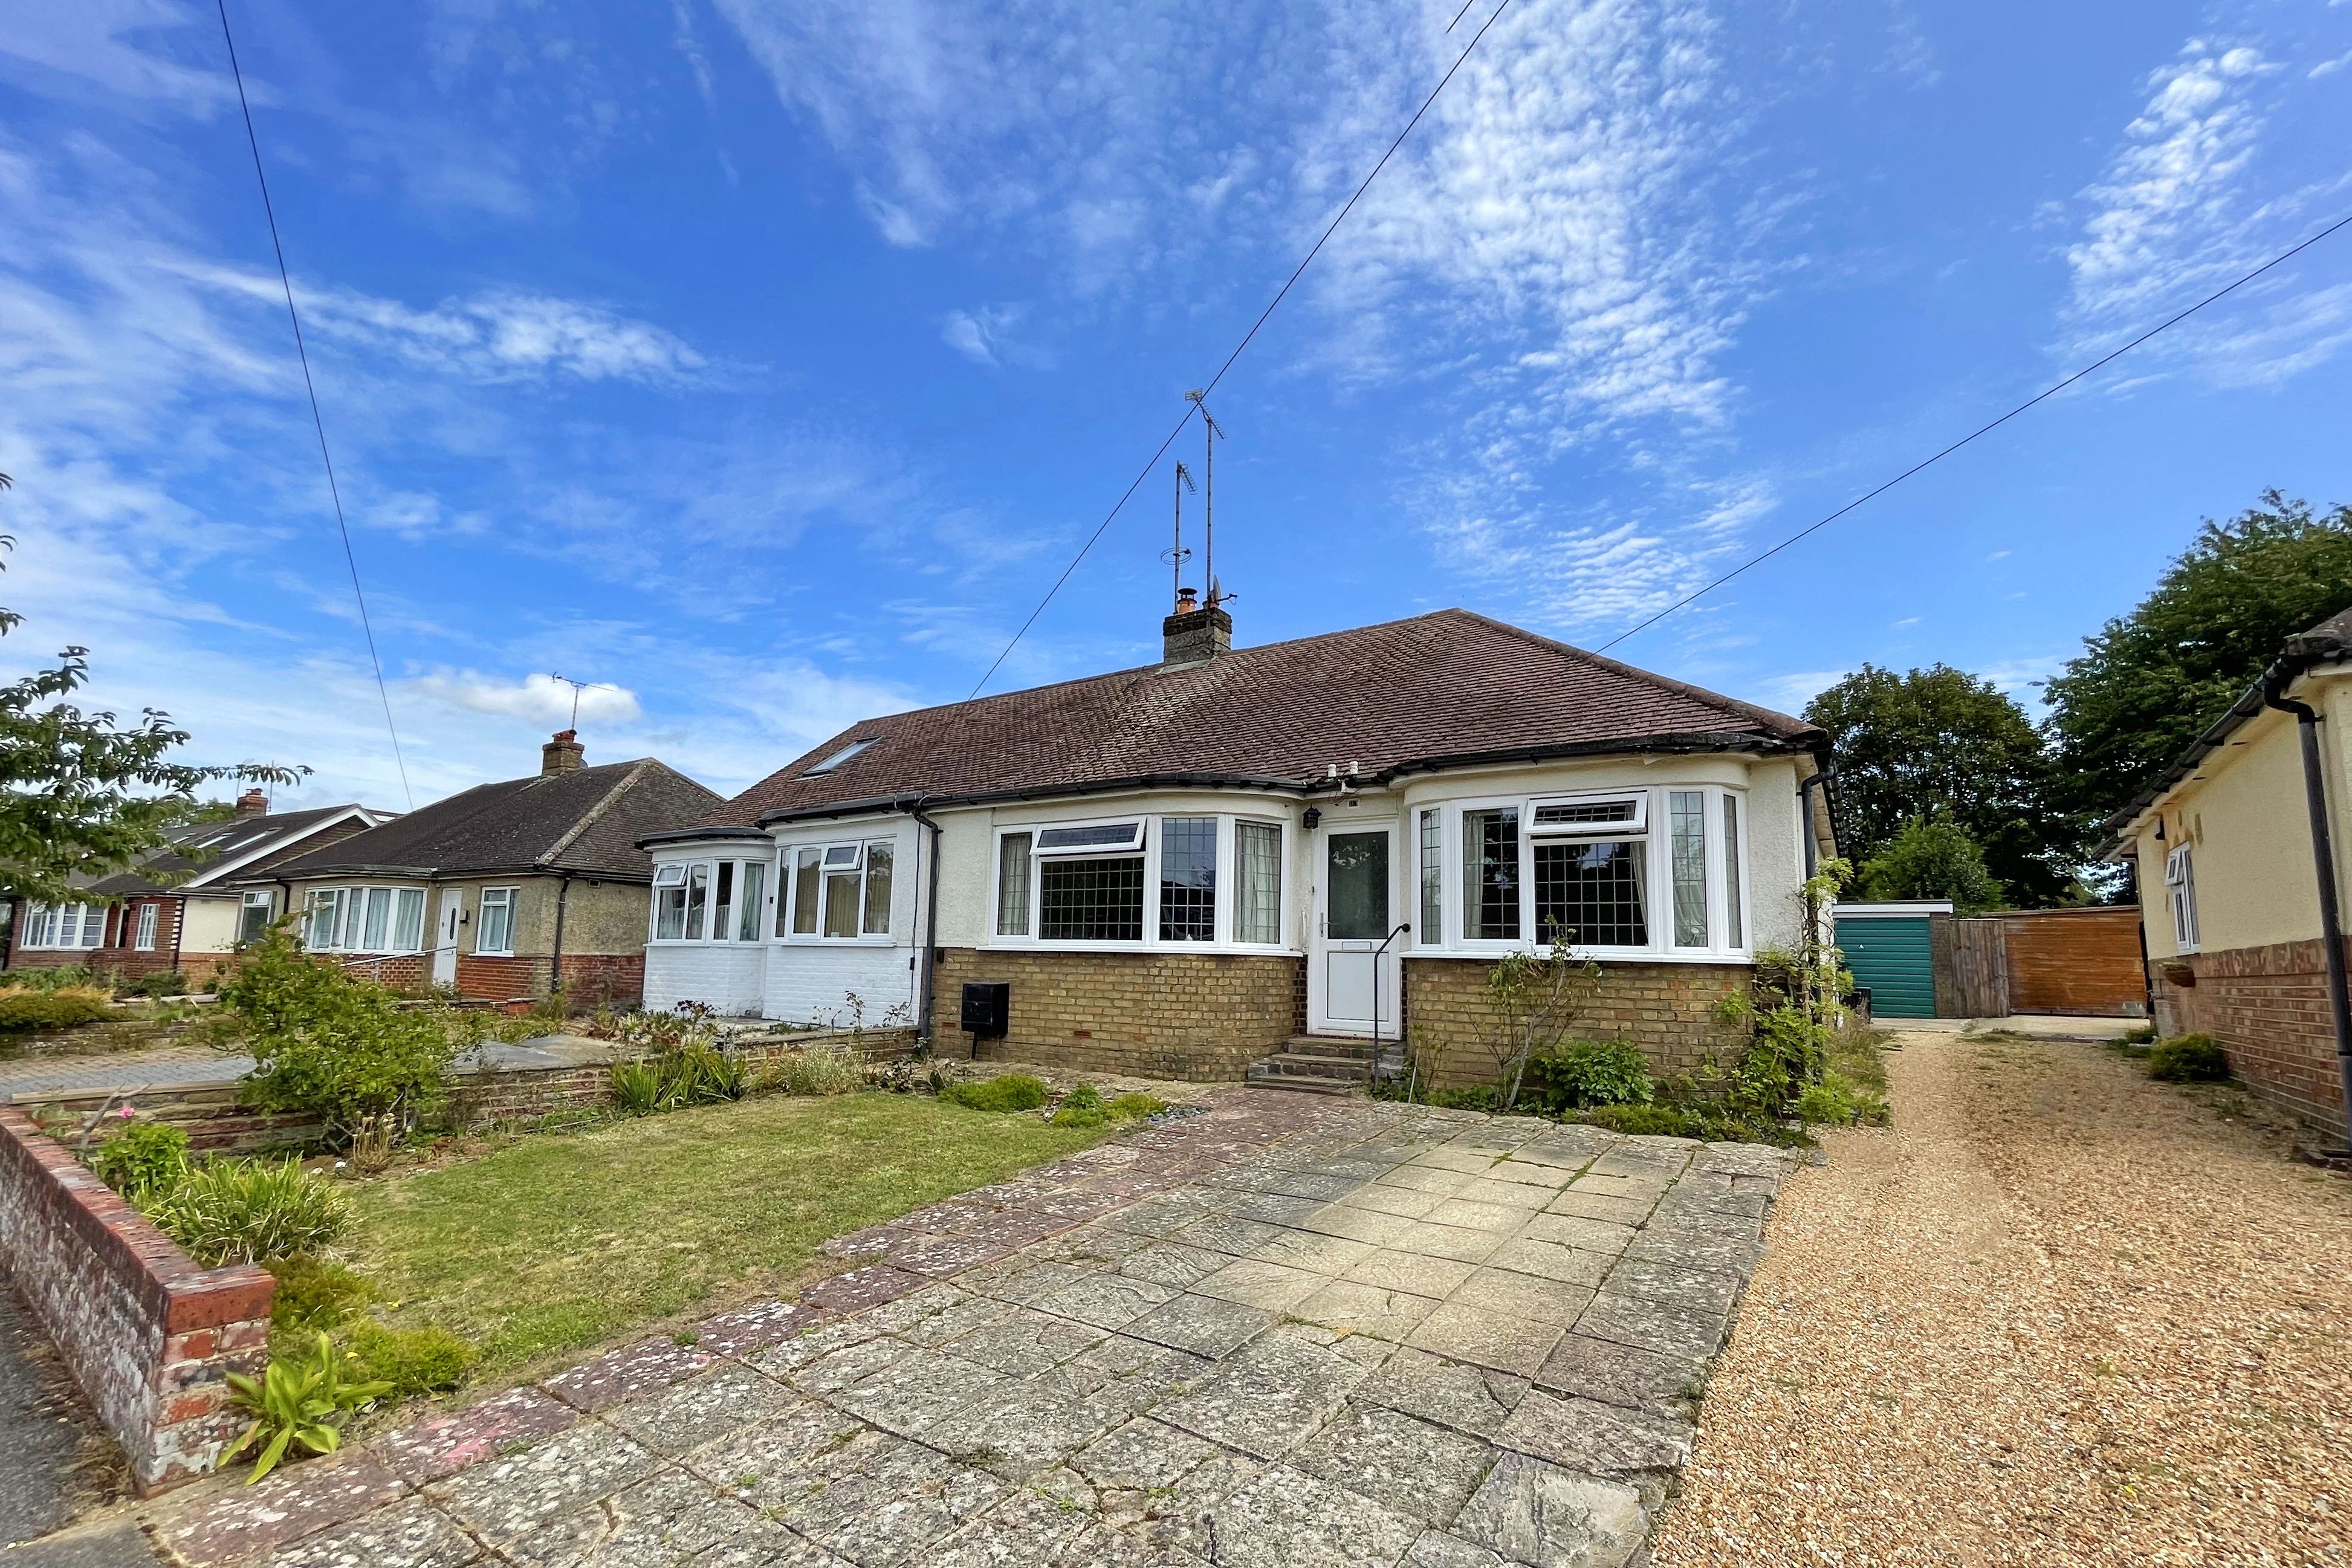 Kings Drive, Hassocks, West Sussex, BN6 8DZ